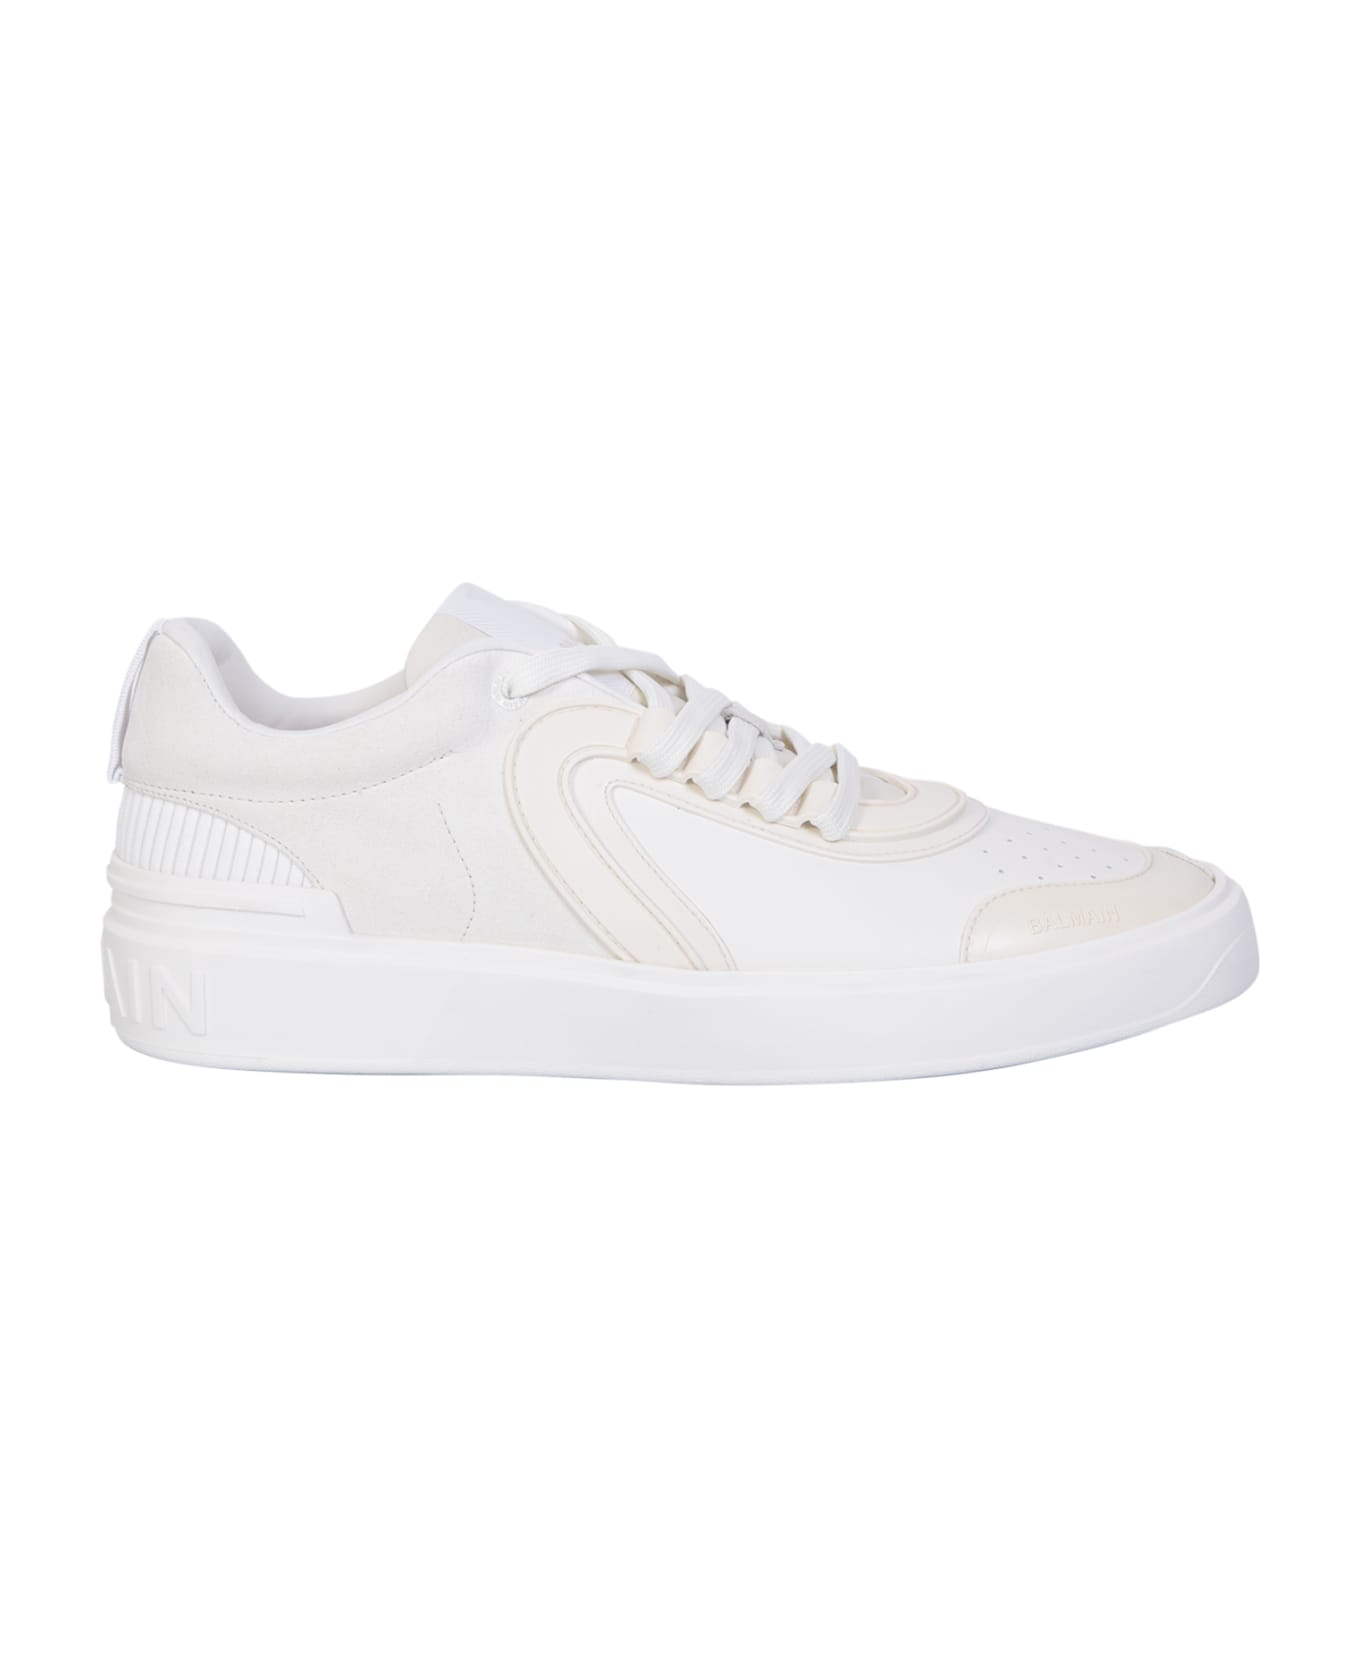 Balmain Sneakers In White Suede And Leather - white スニーカー